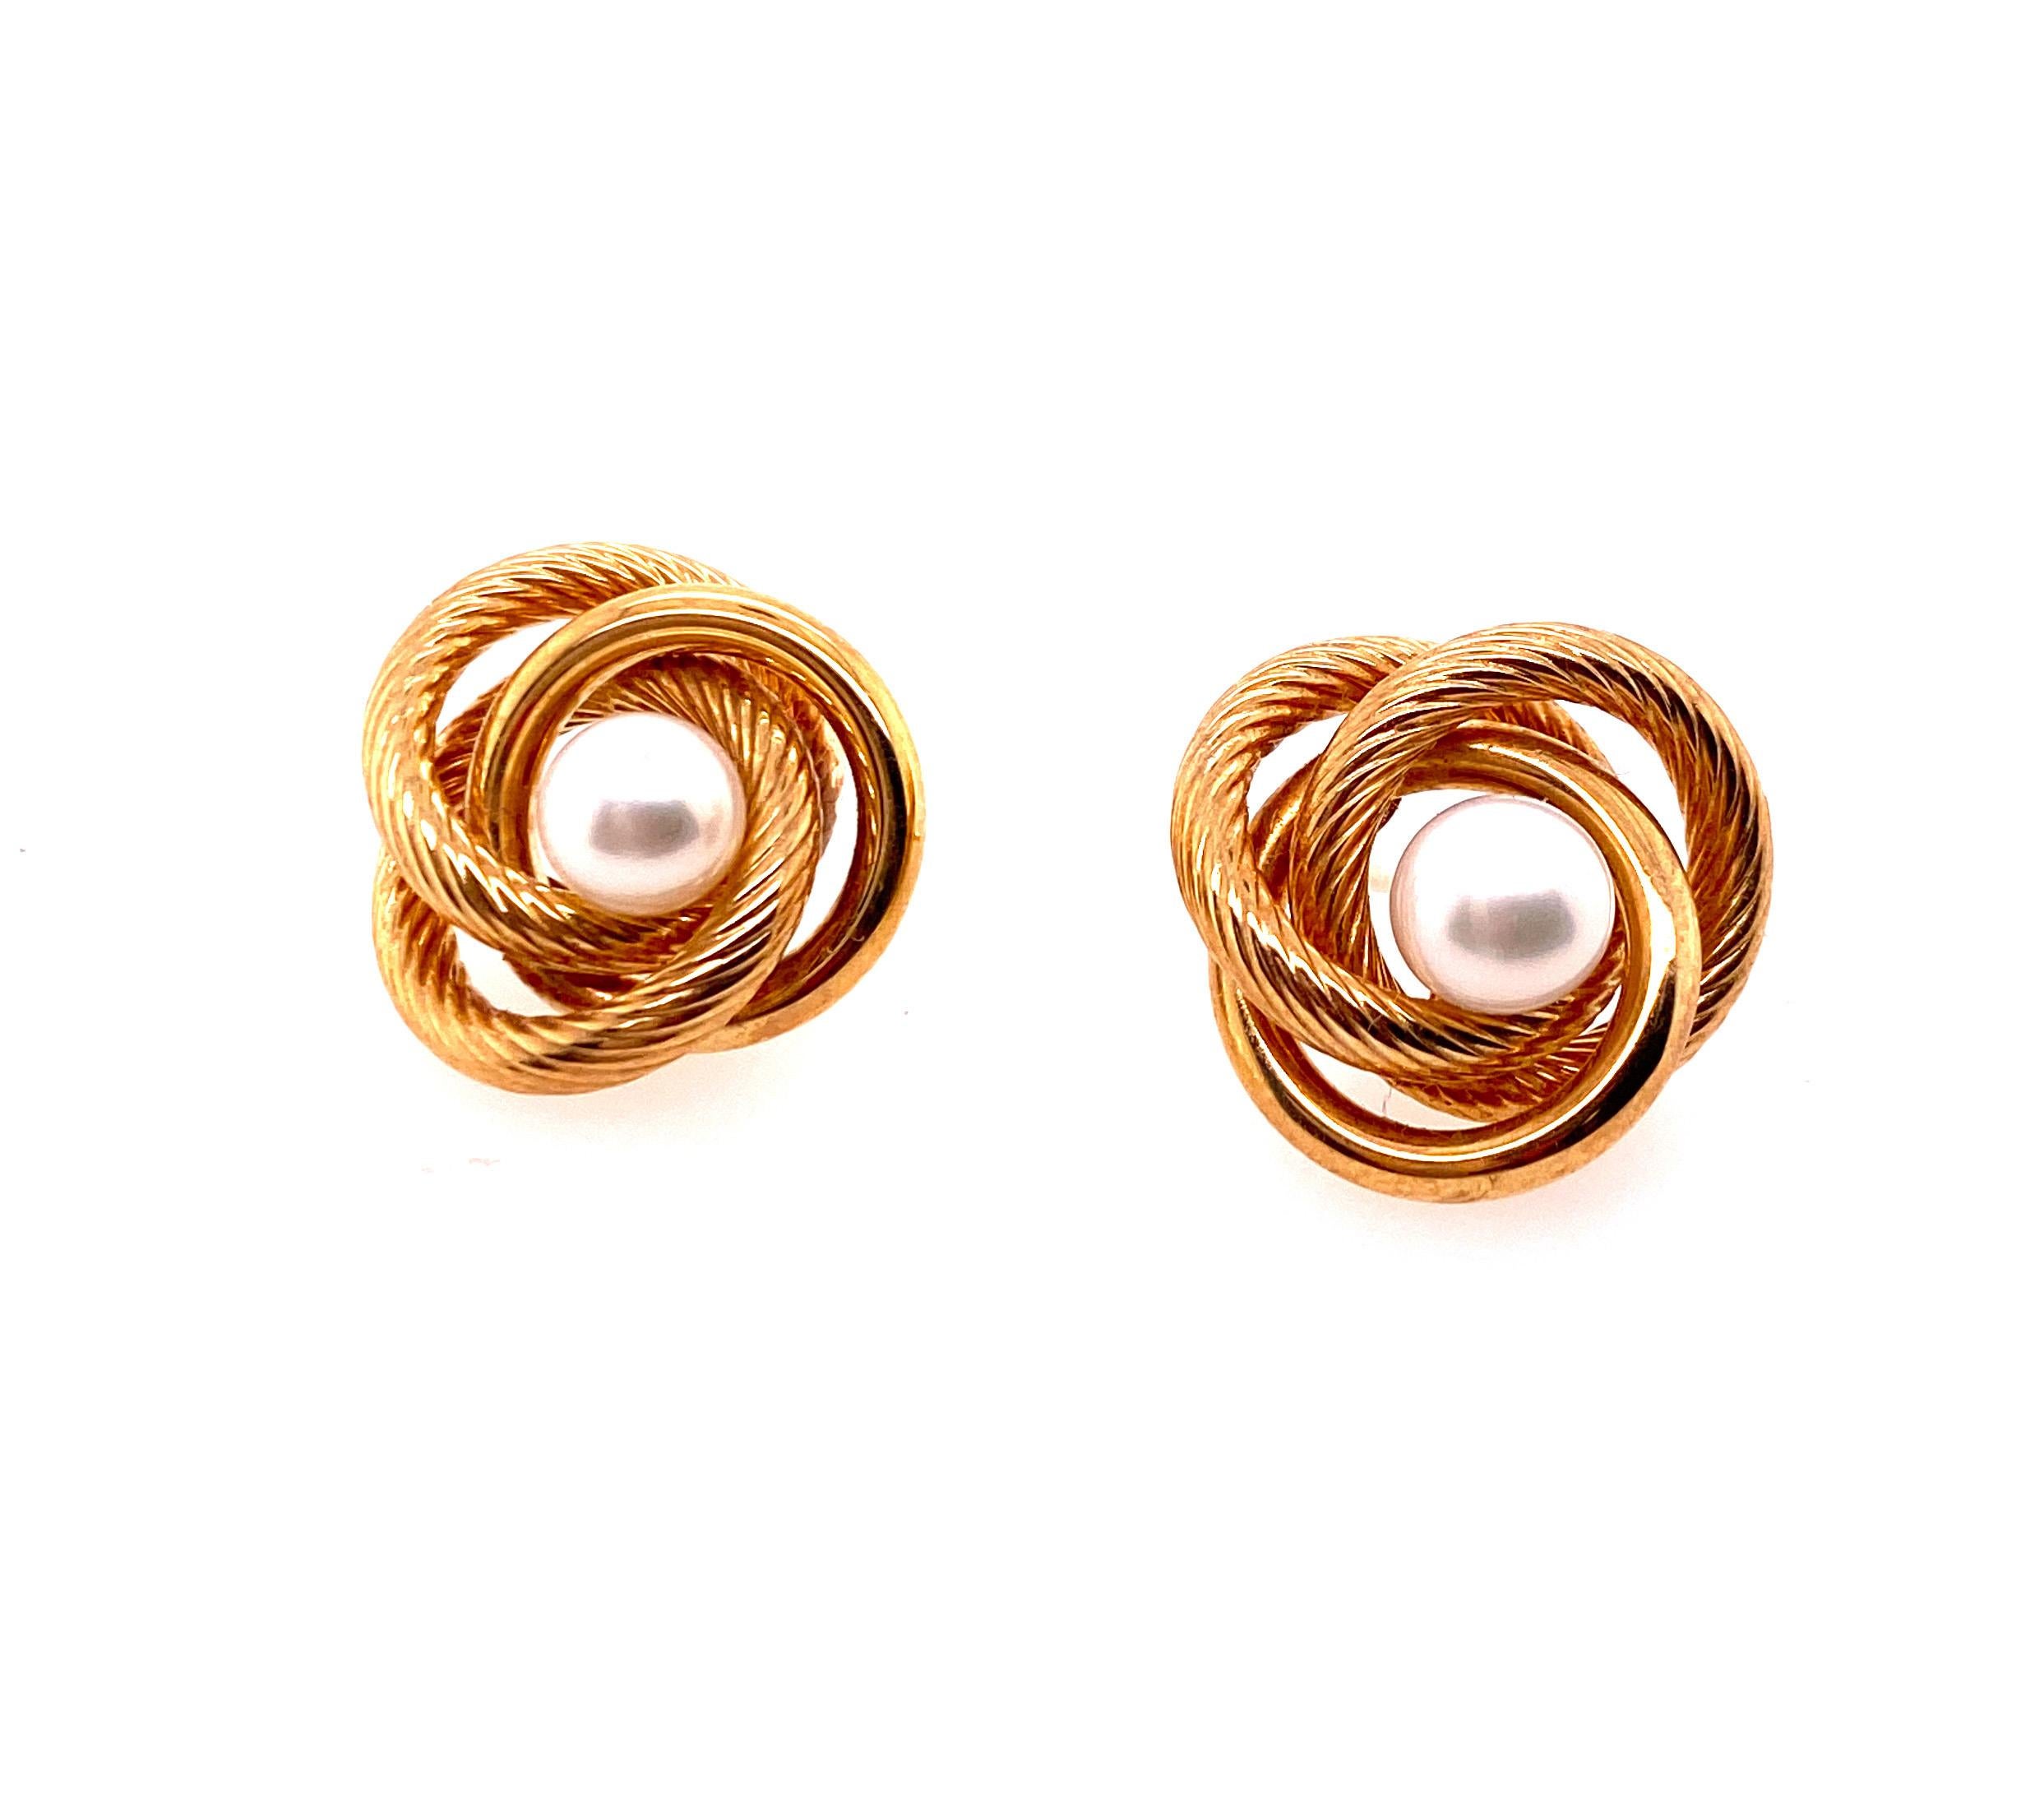 Round Cut Yellow Gold Knot Stud Earring Enhancers with Pearl & Ball Stud Set 14K